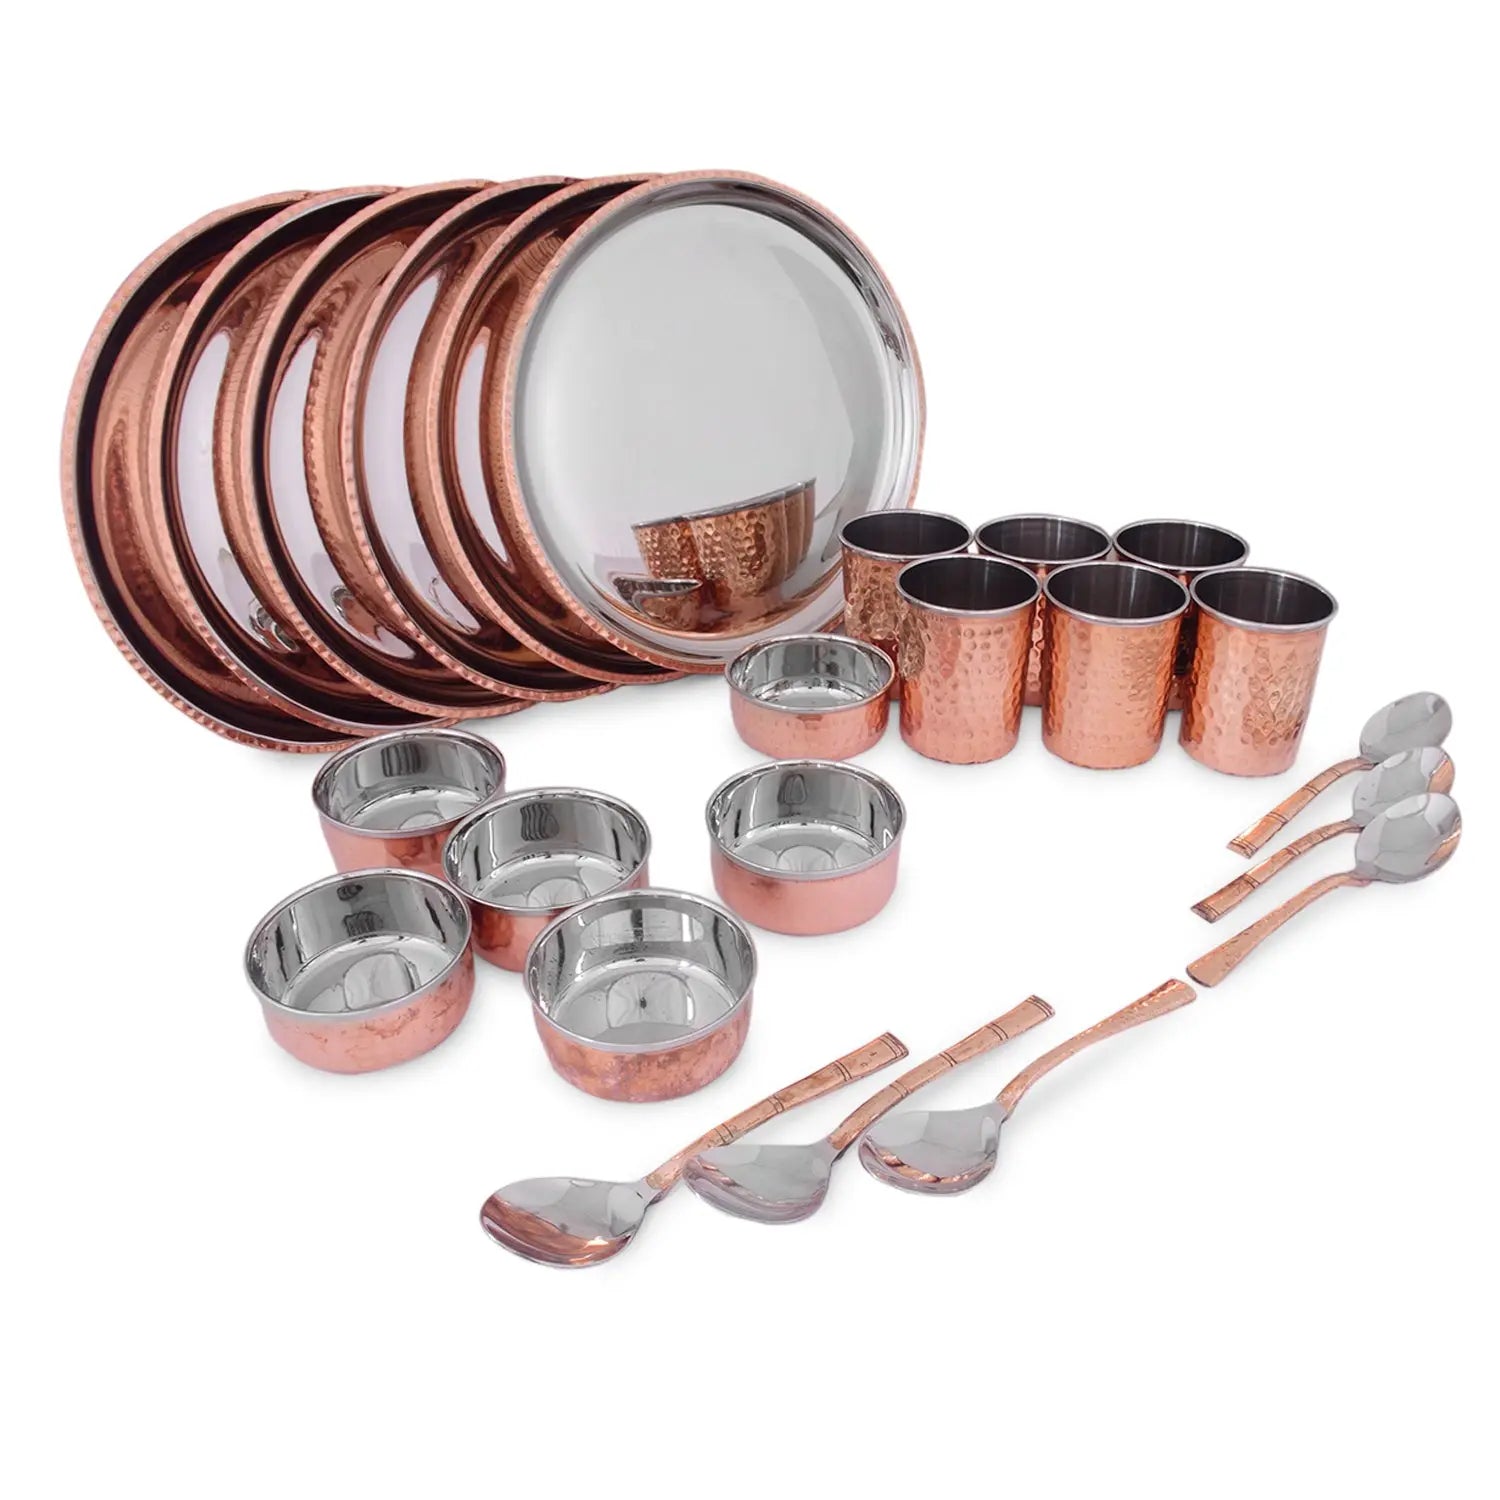 Pure Copper & Stainless Steel Royal Hammered Design Dinner Set 28 pcs - CROCKERY WALA AND COMPANY 